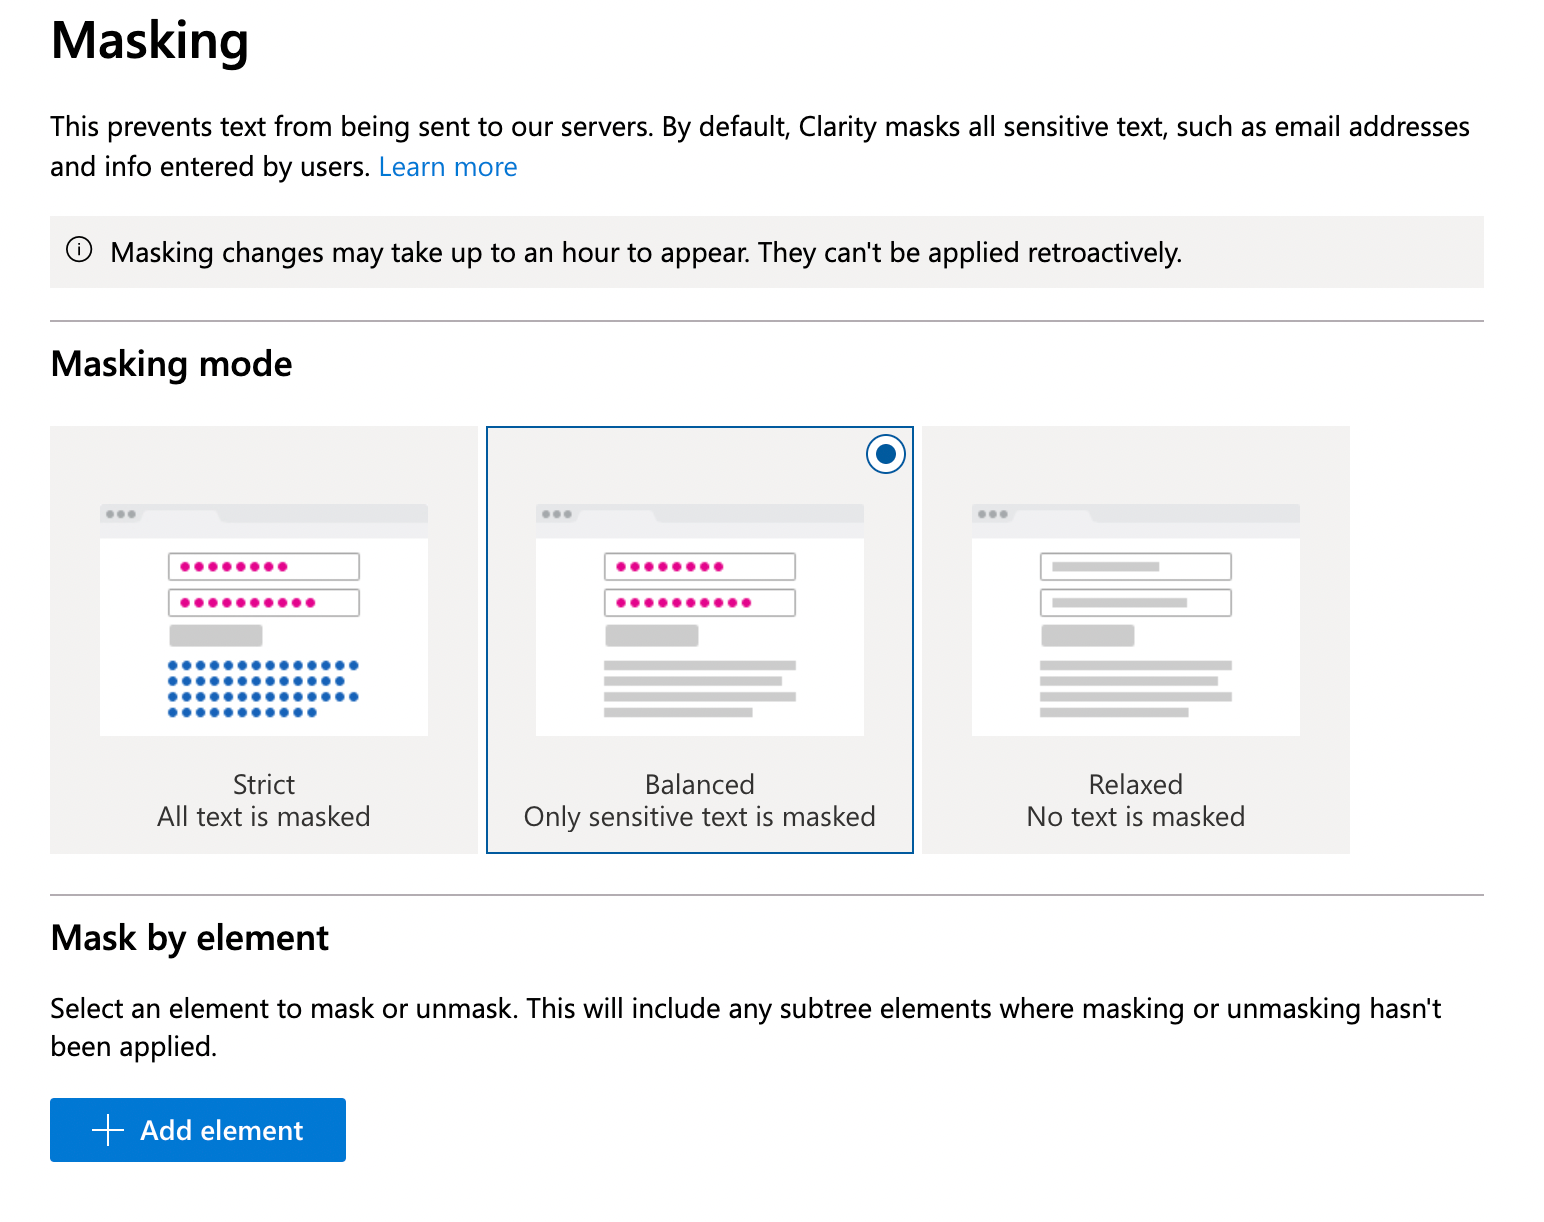 Screenshot showing the masking options within Microsoft Clarity